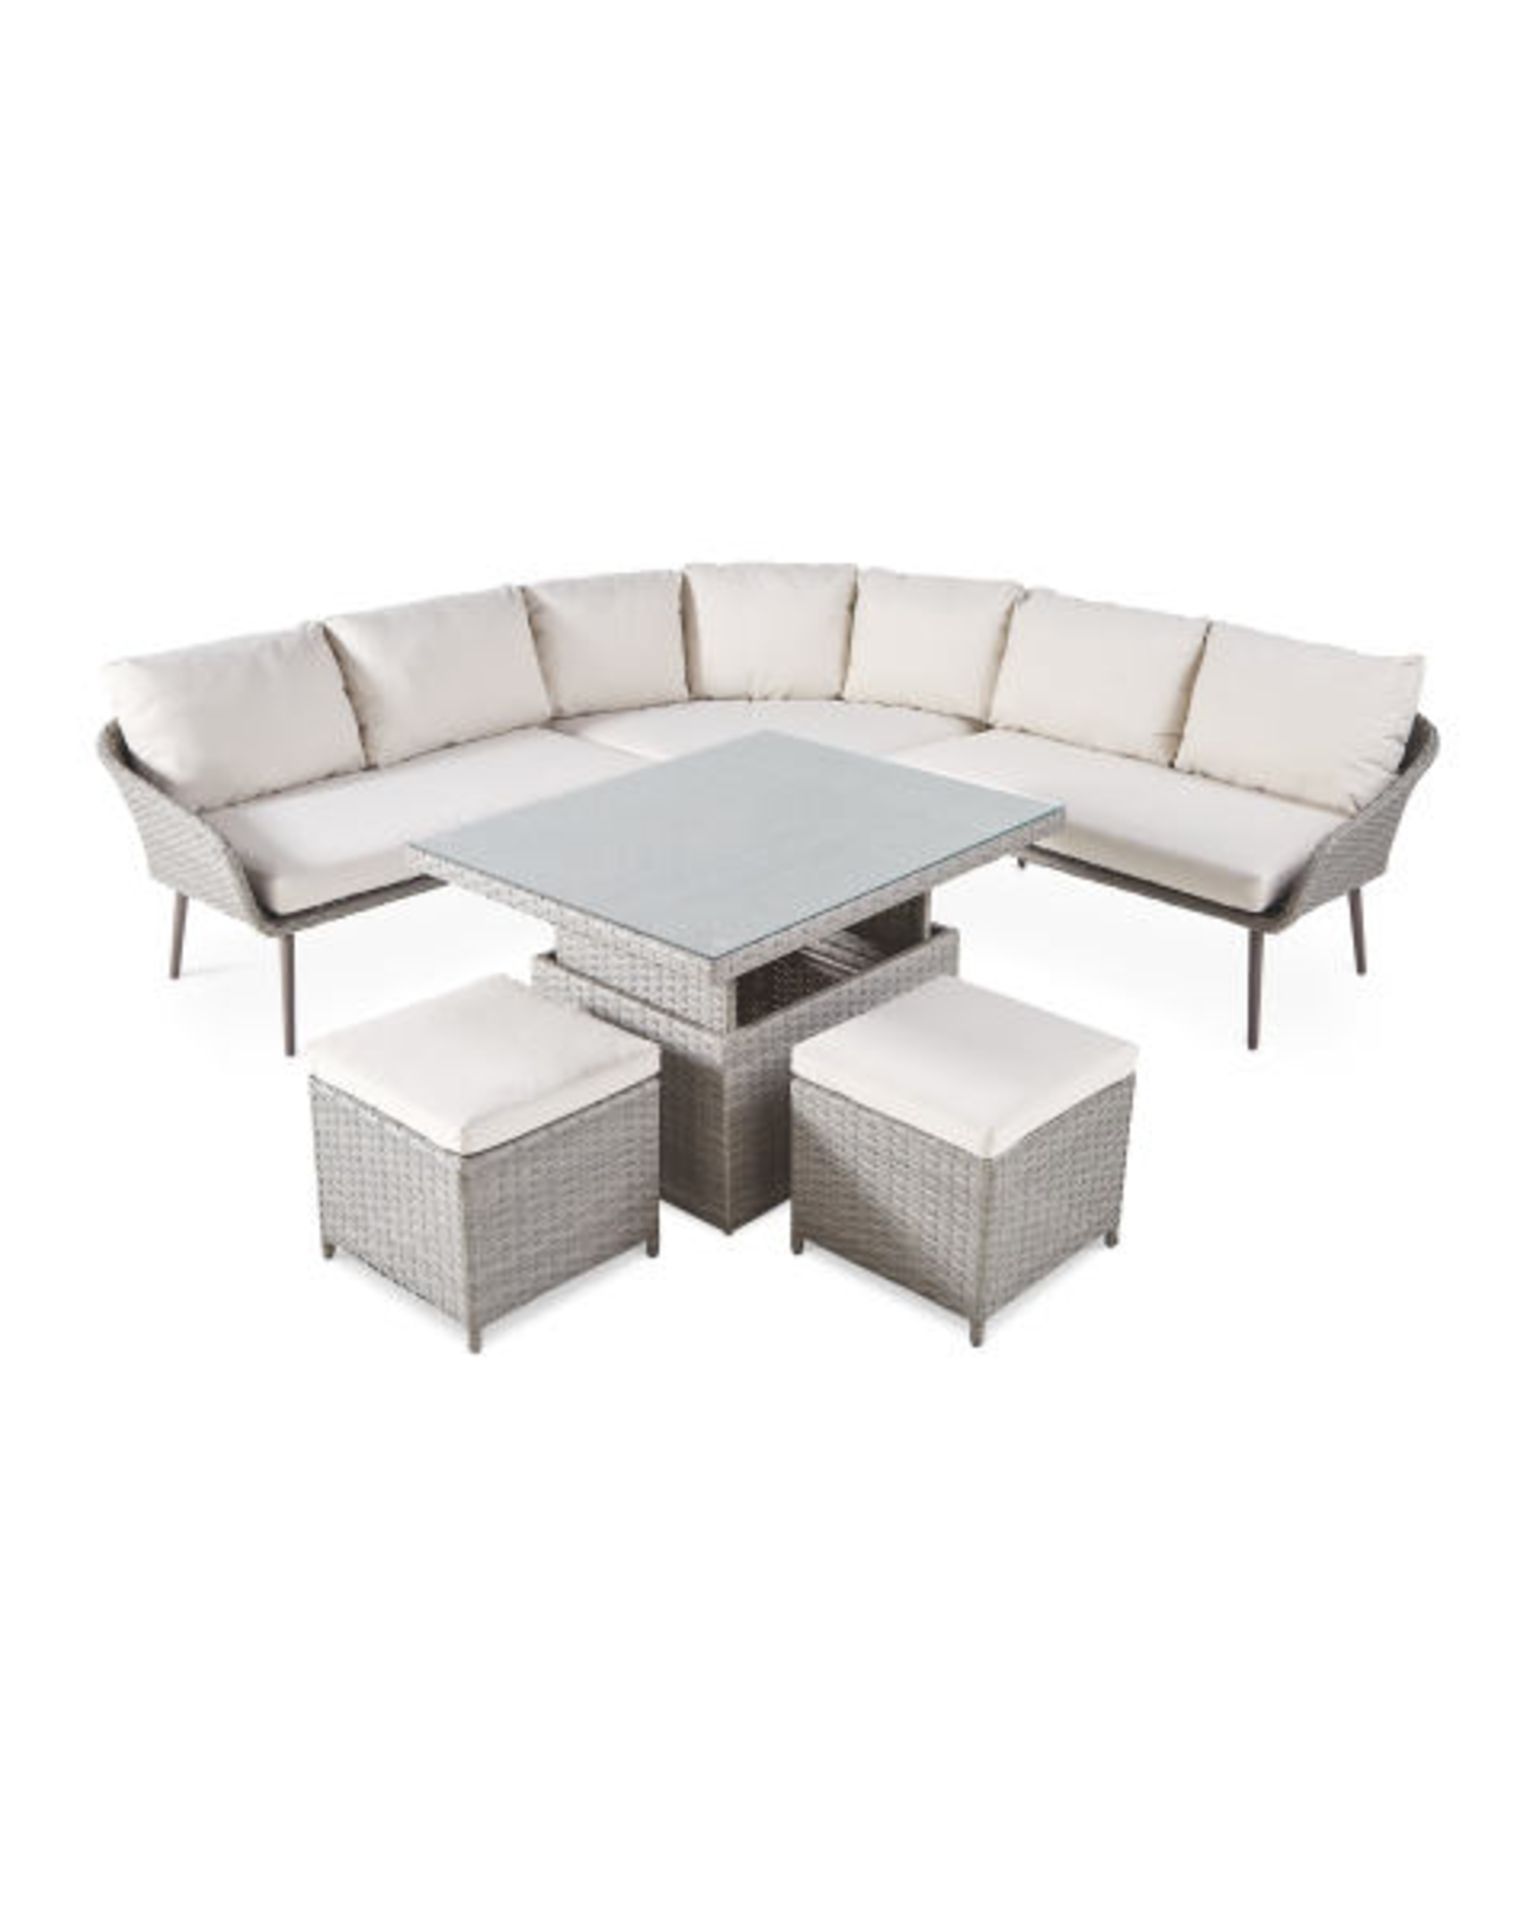 Multifunctional Lounge & Dining Corner Sofa Dining Set. Enjoy the warmer weather with this Luxury - Image 2 of 2